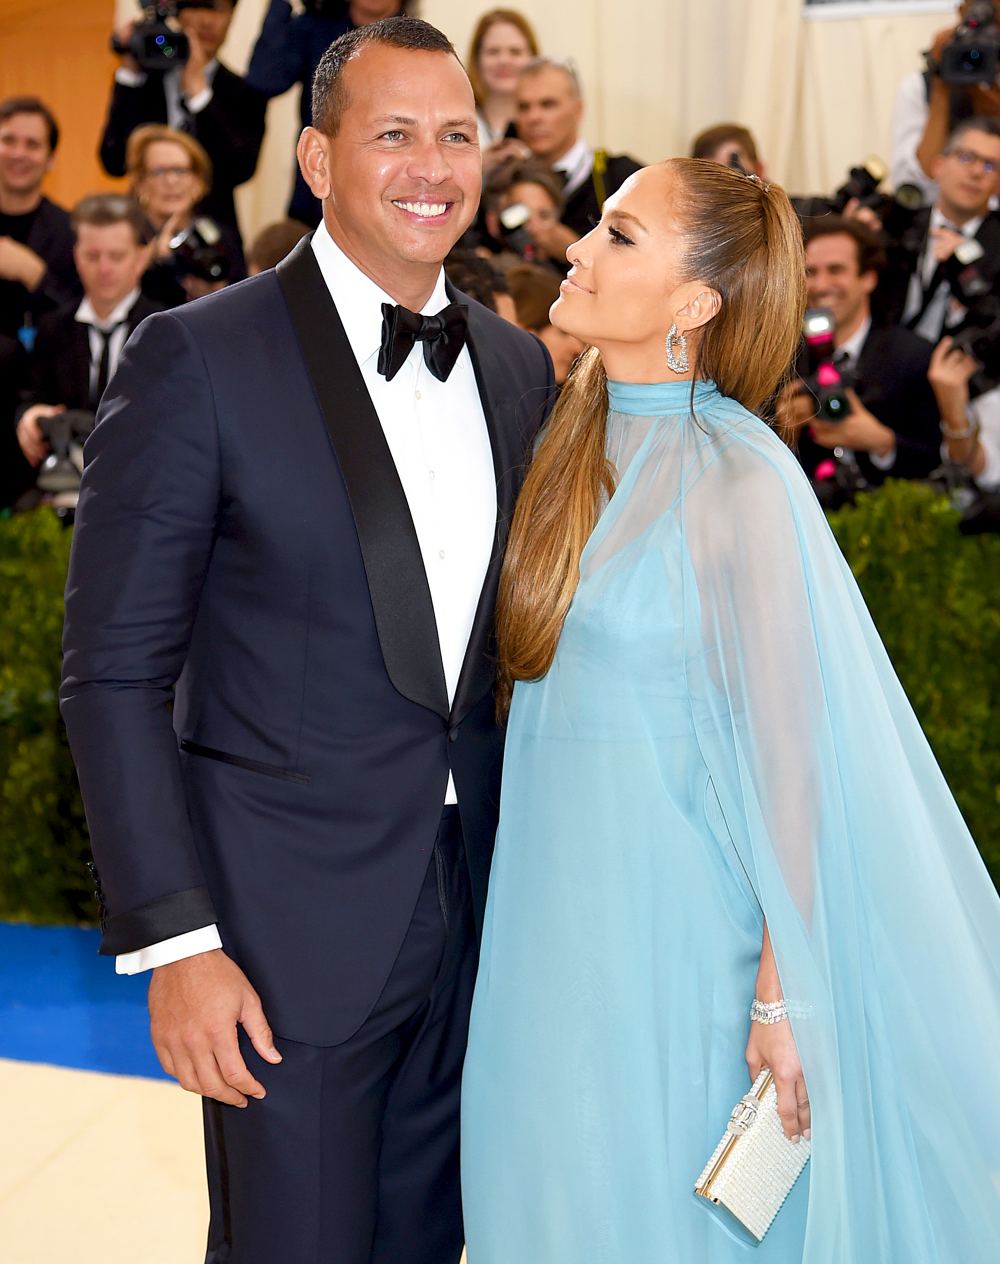 Alex Rodriguez and Jennifer Lopez attend the 'Rei Kawakubo/Comme des Garcons: Art Of The In-Between' Costume Institute Gala at Metropolitan Museum of Art on May 1, 2017 in New York City.